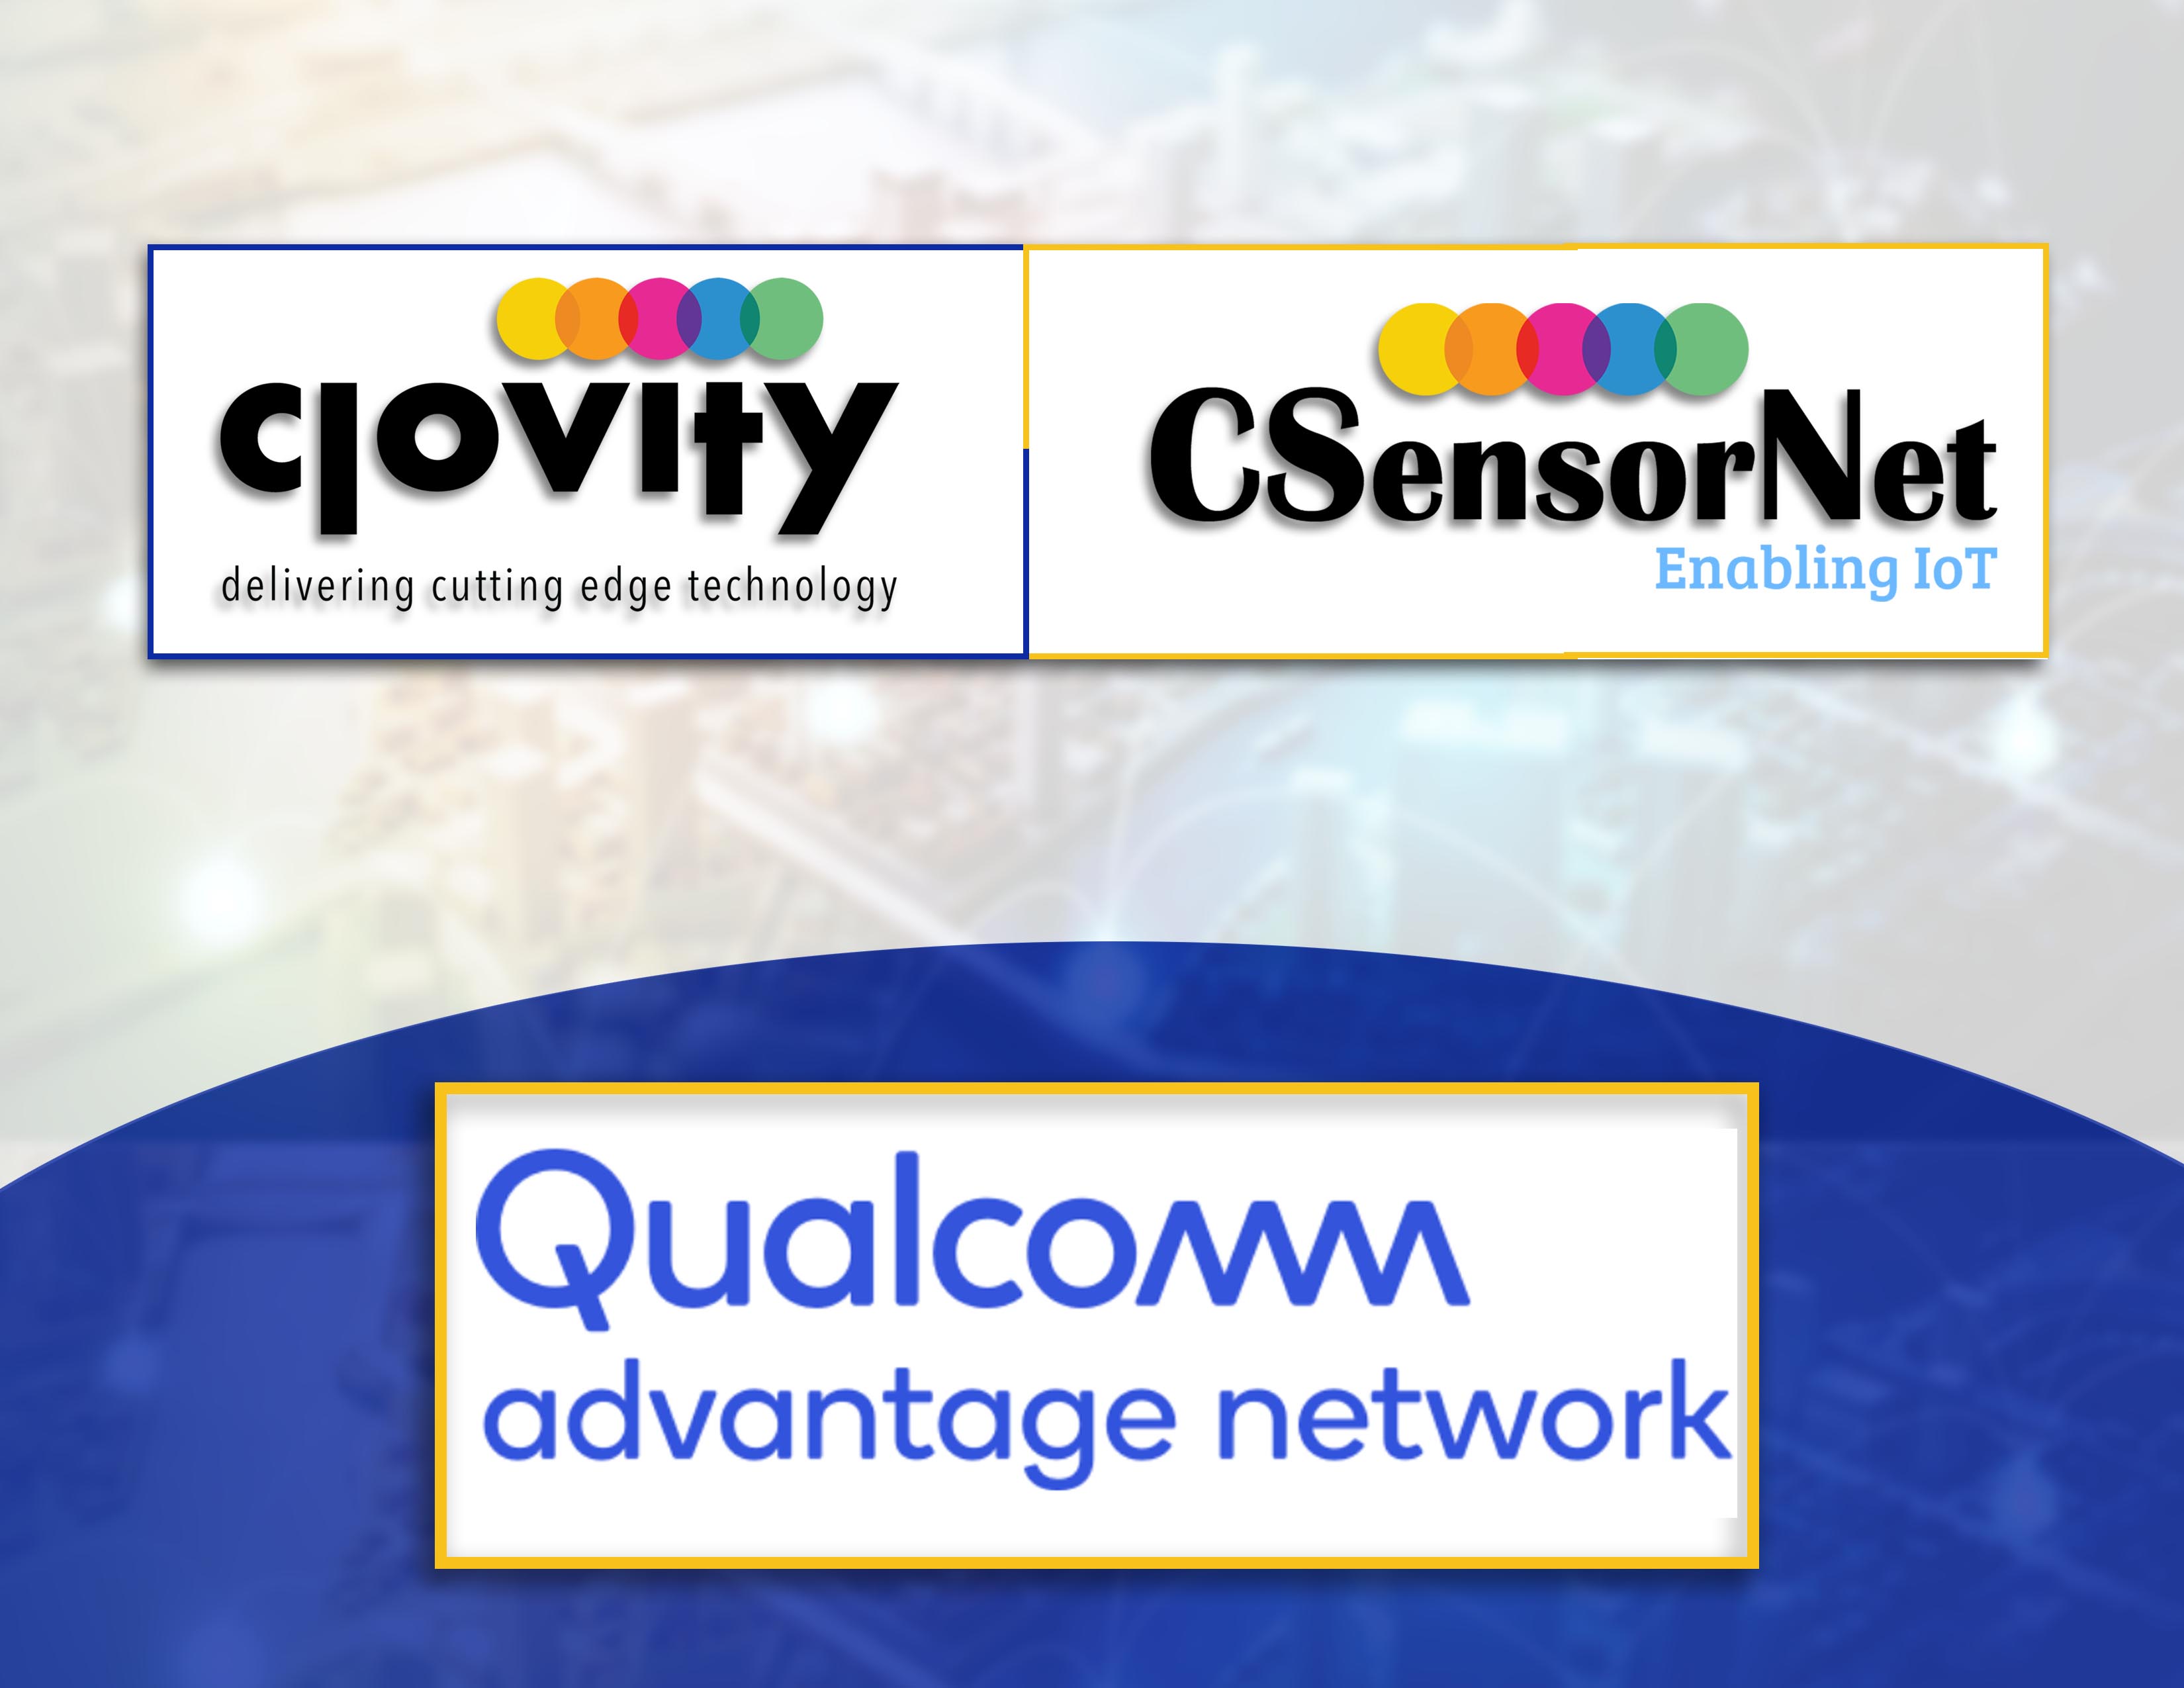 Clovity Brings Its End-to-End CSensorNet IoT Platform to the Qualcomm Smart Cities Accelerator Program to Develop the Next-Generation Campus